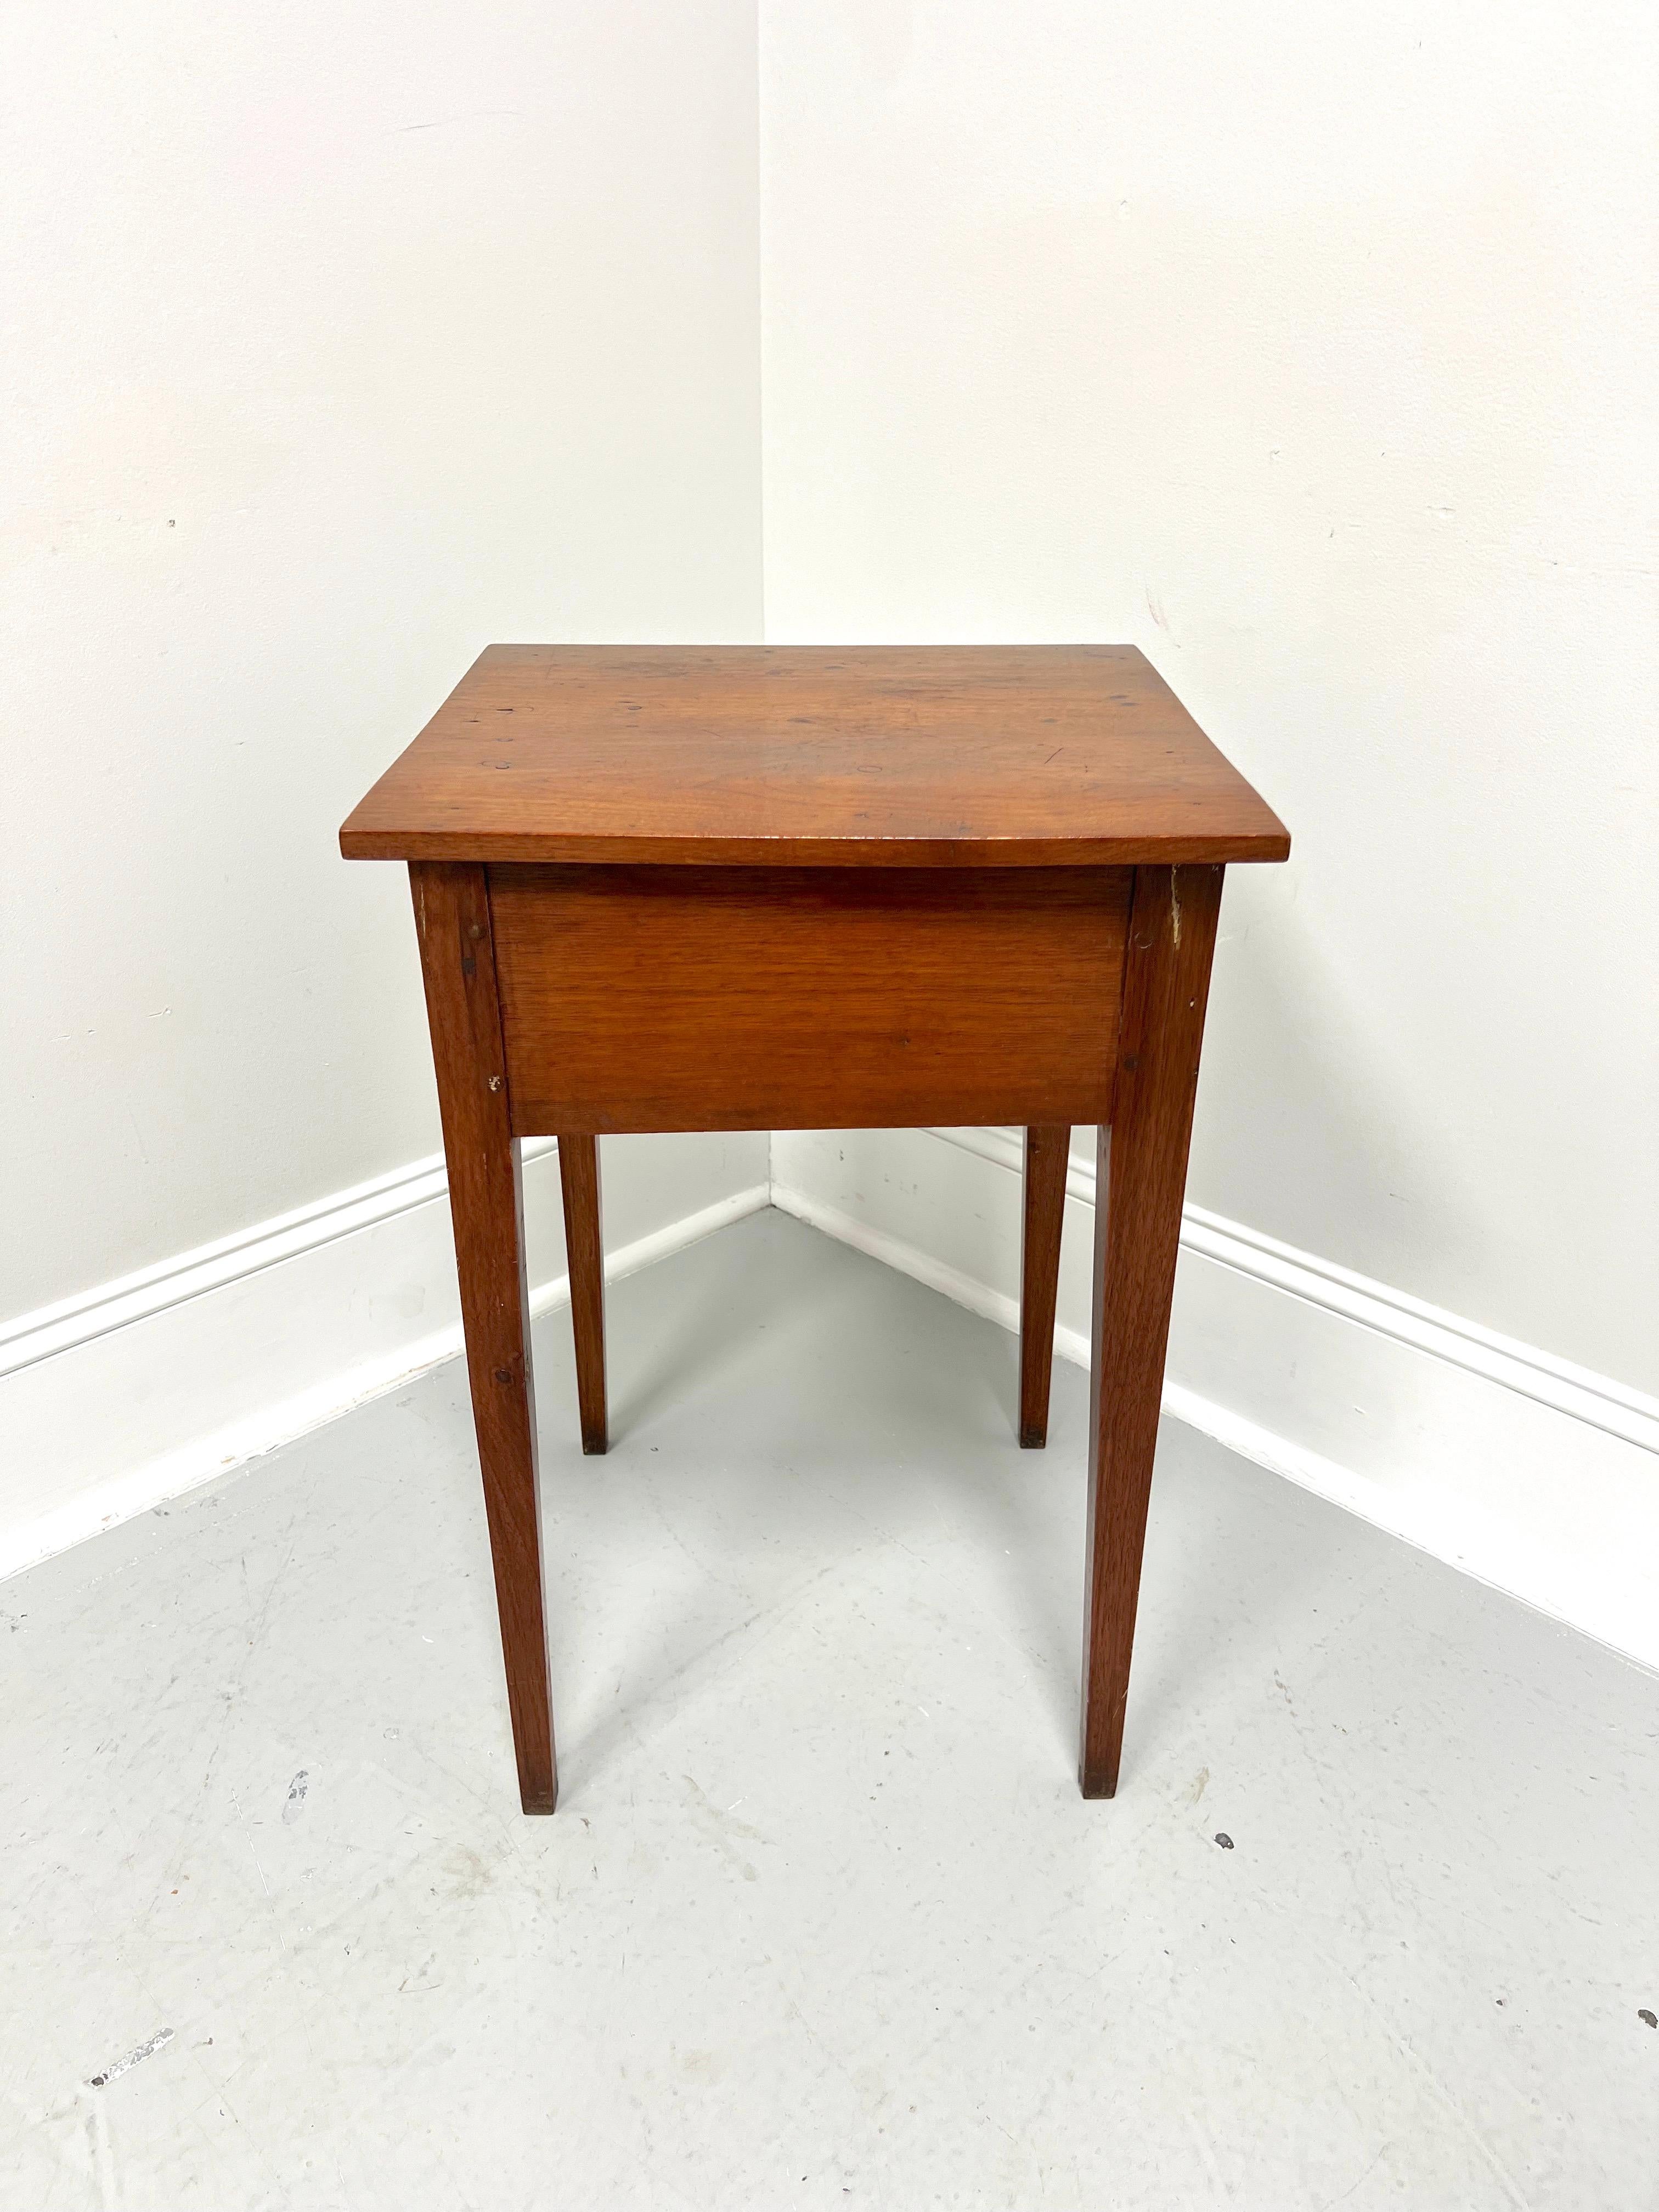 Rustic Antique 19th Century Walnut Single Drawer Side Table with Tapered Legs